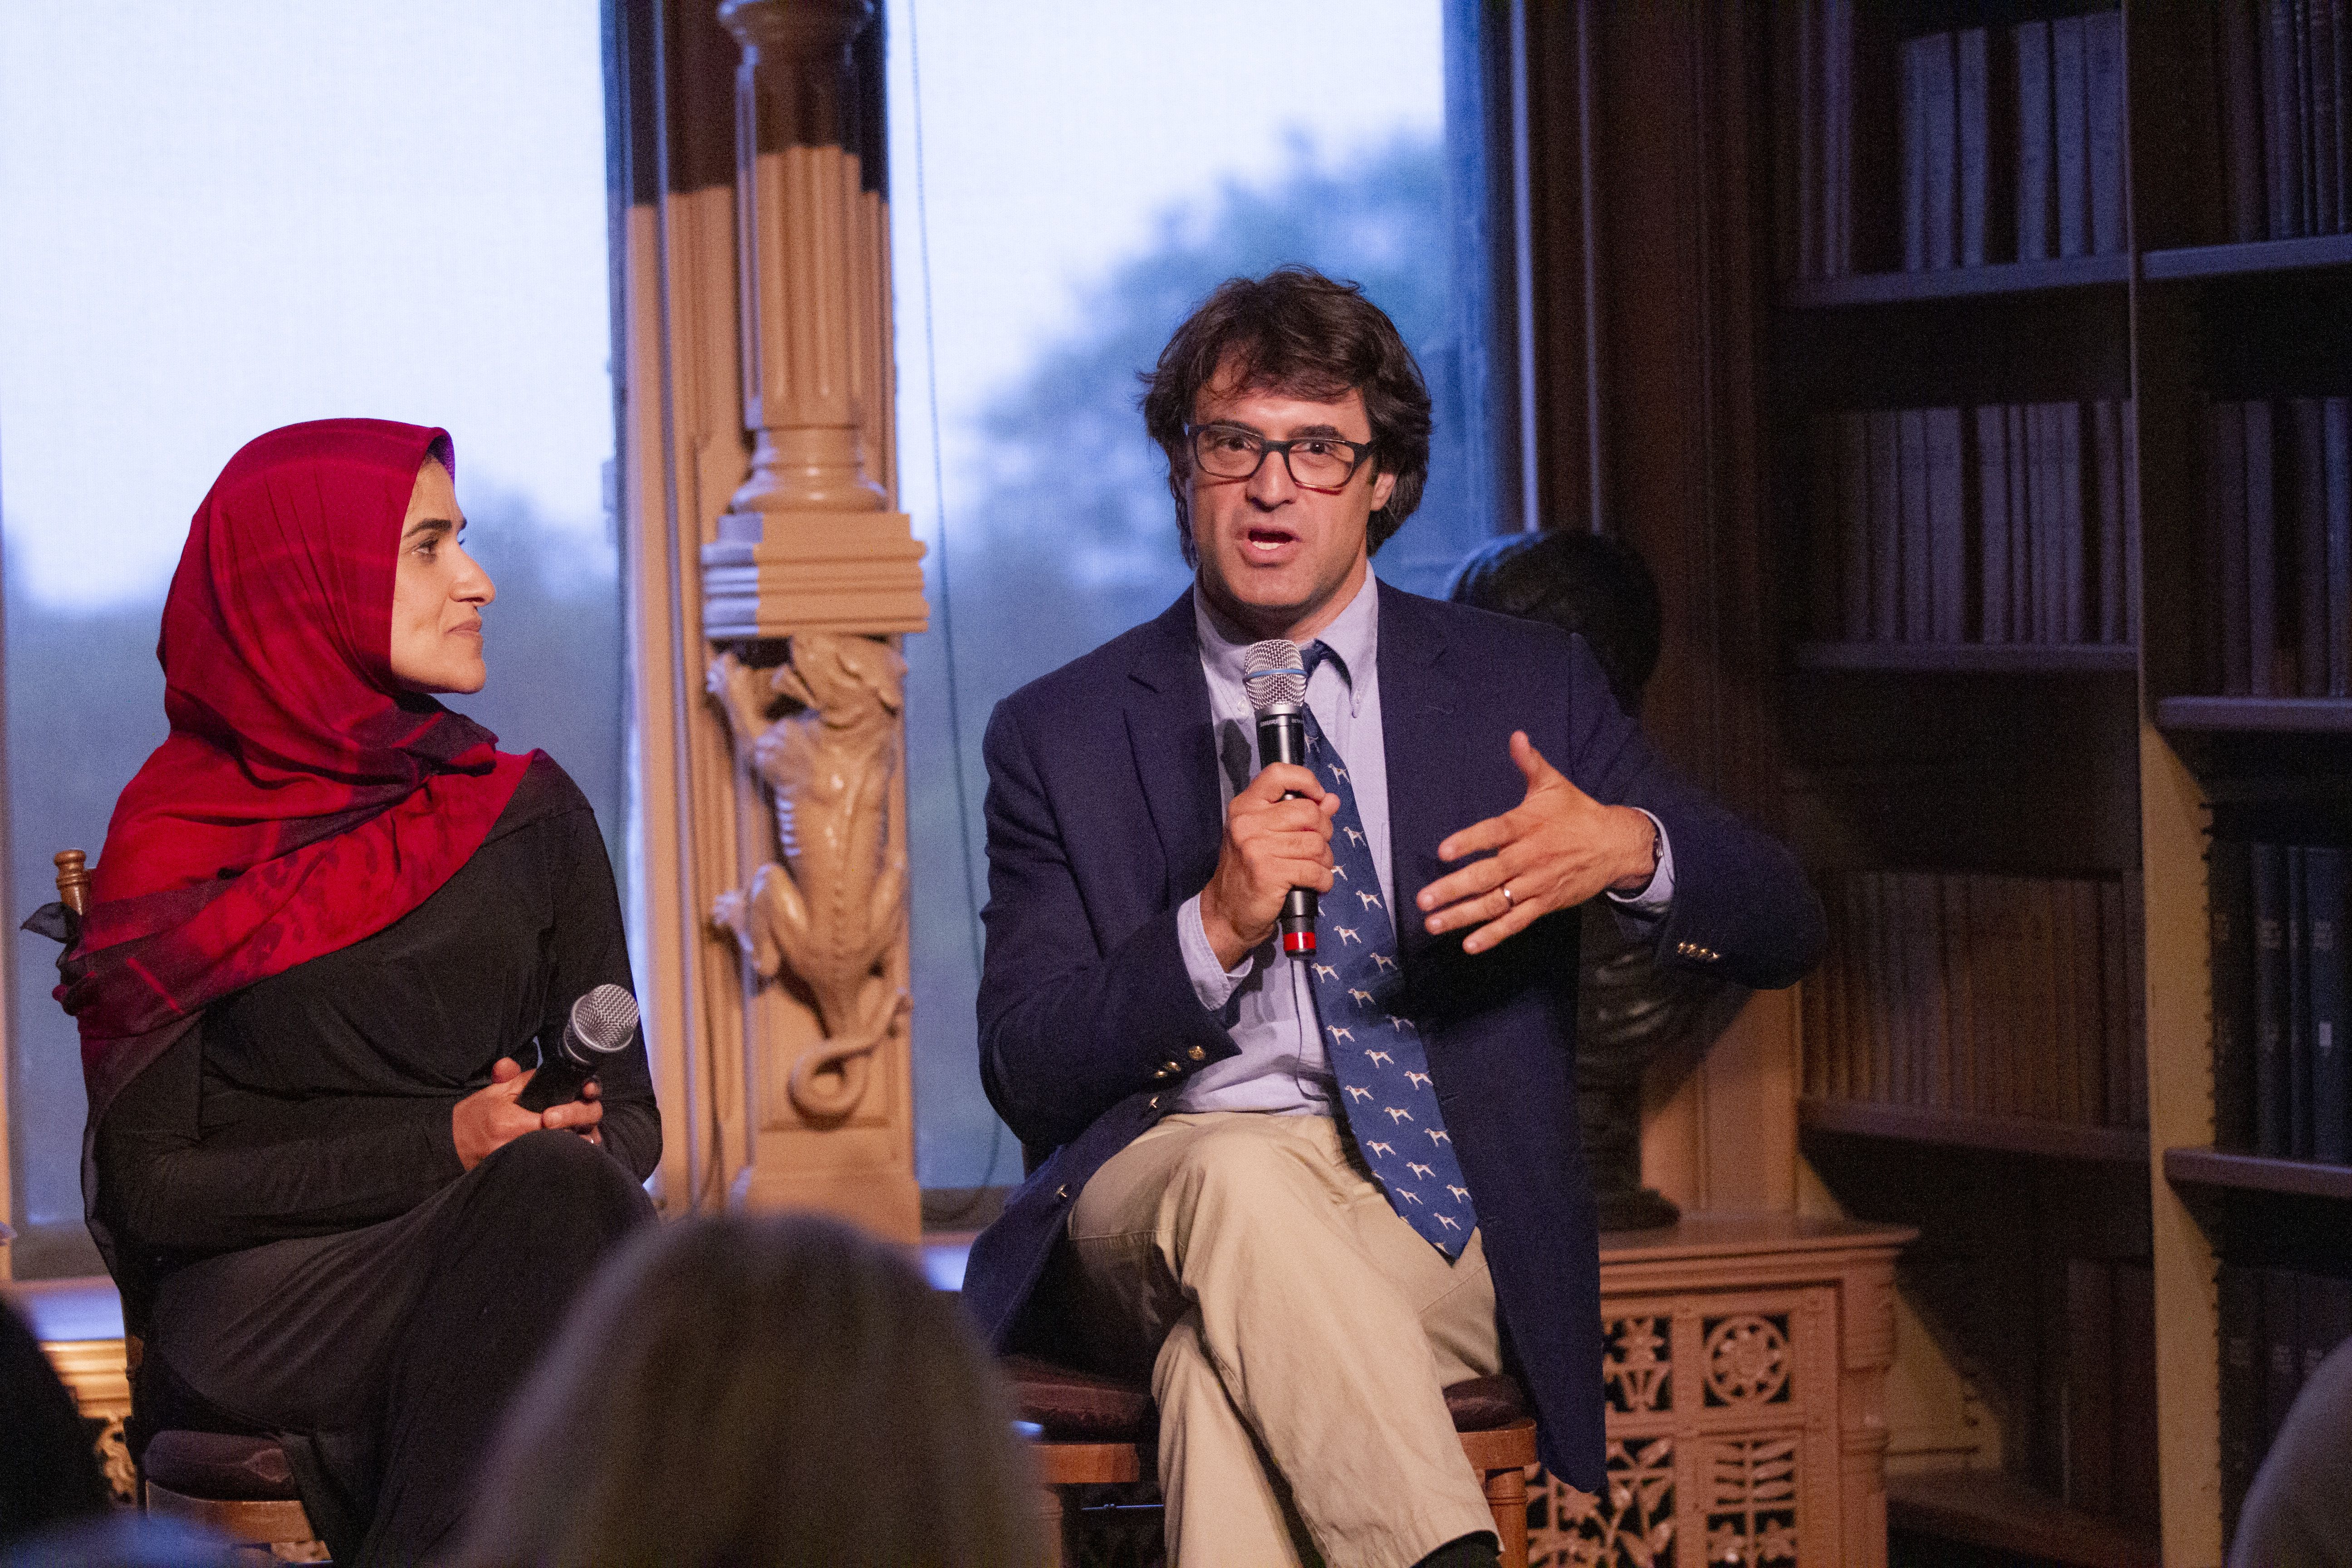 Mogahed (left) and Oppenheimer (right) discuss resilience and interfaith collaboration in Pittsburgh communities. Image by Jin Ding. United States, 2019.